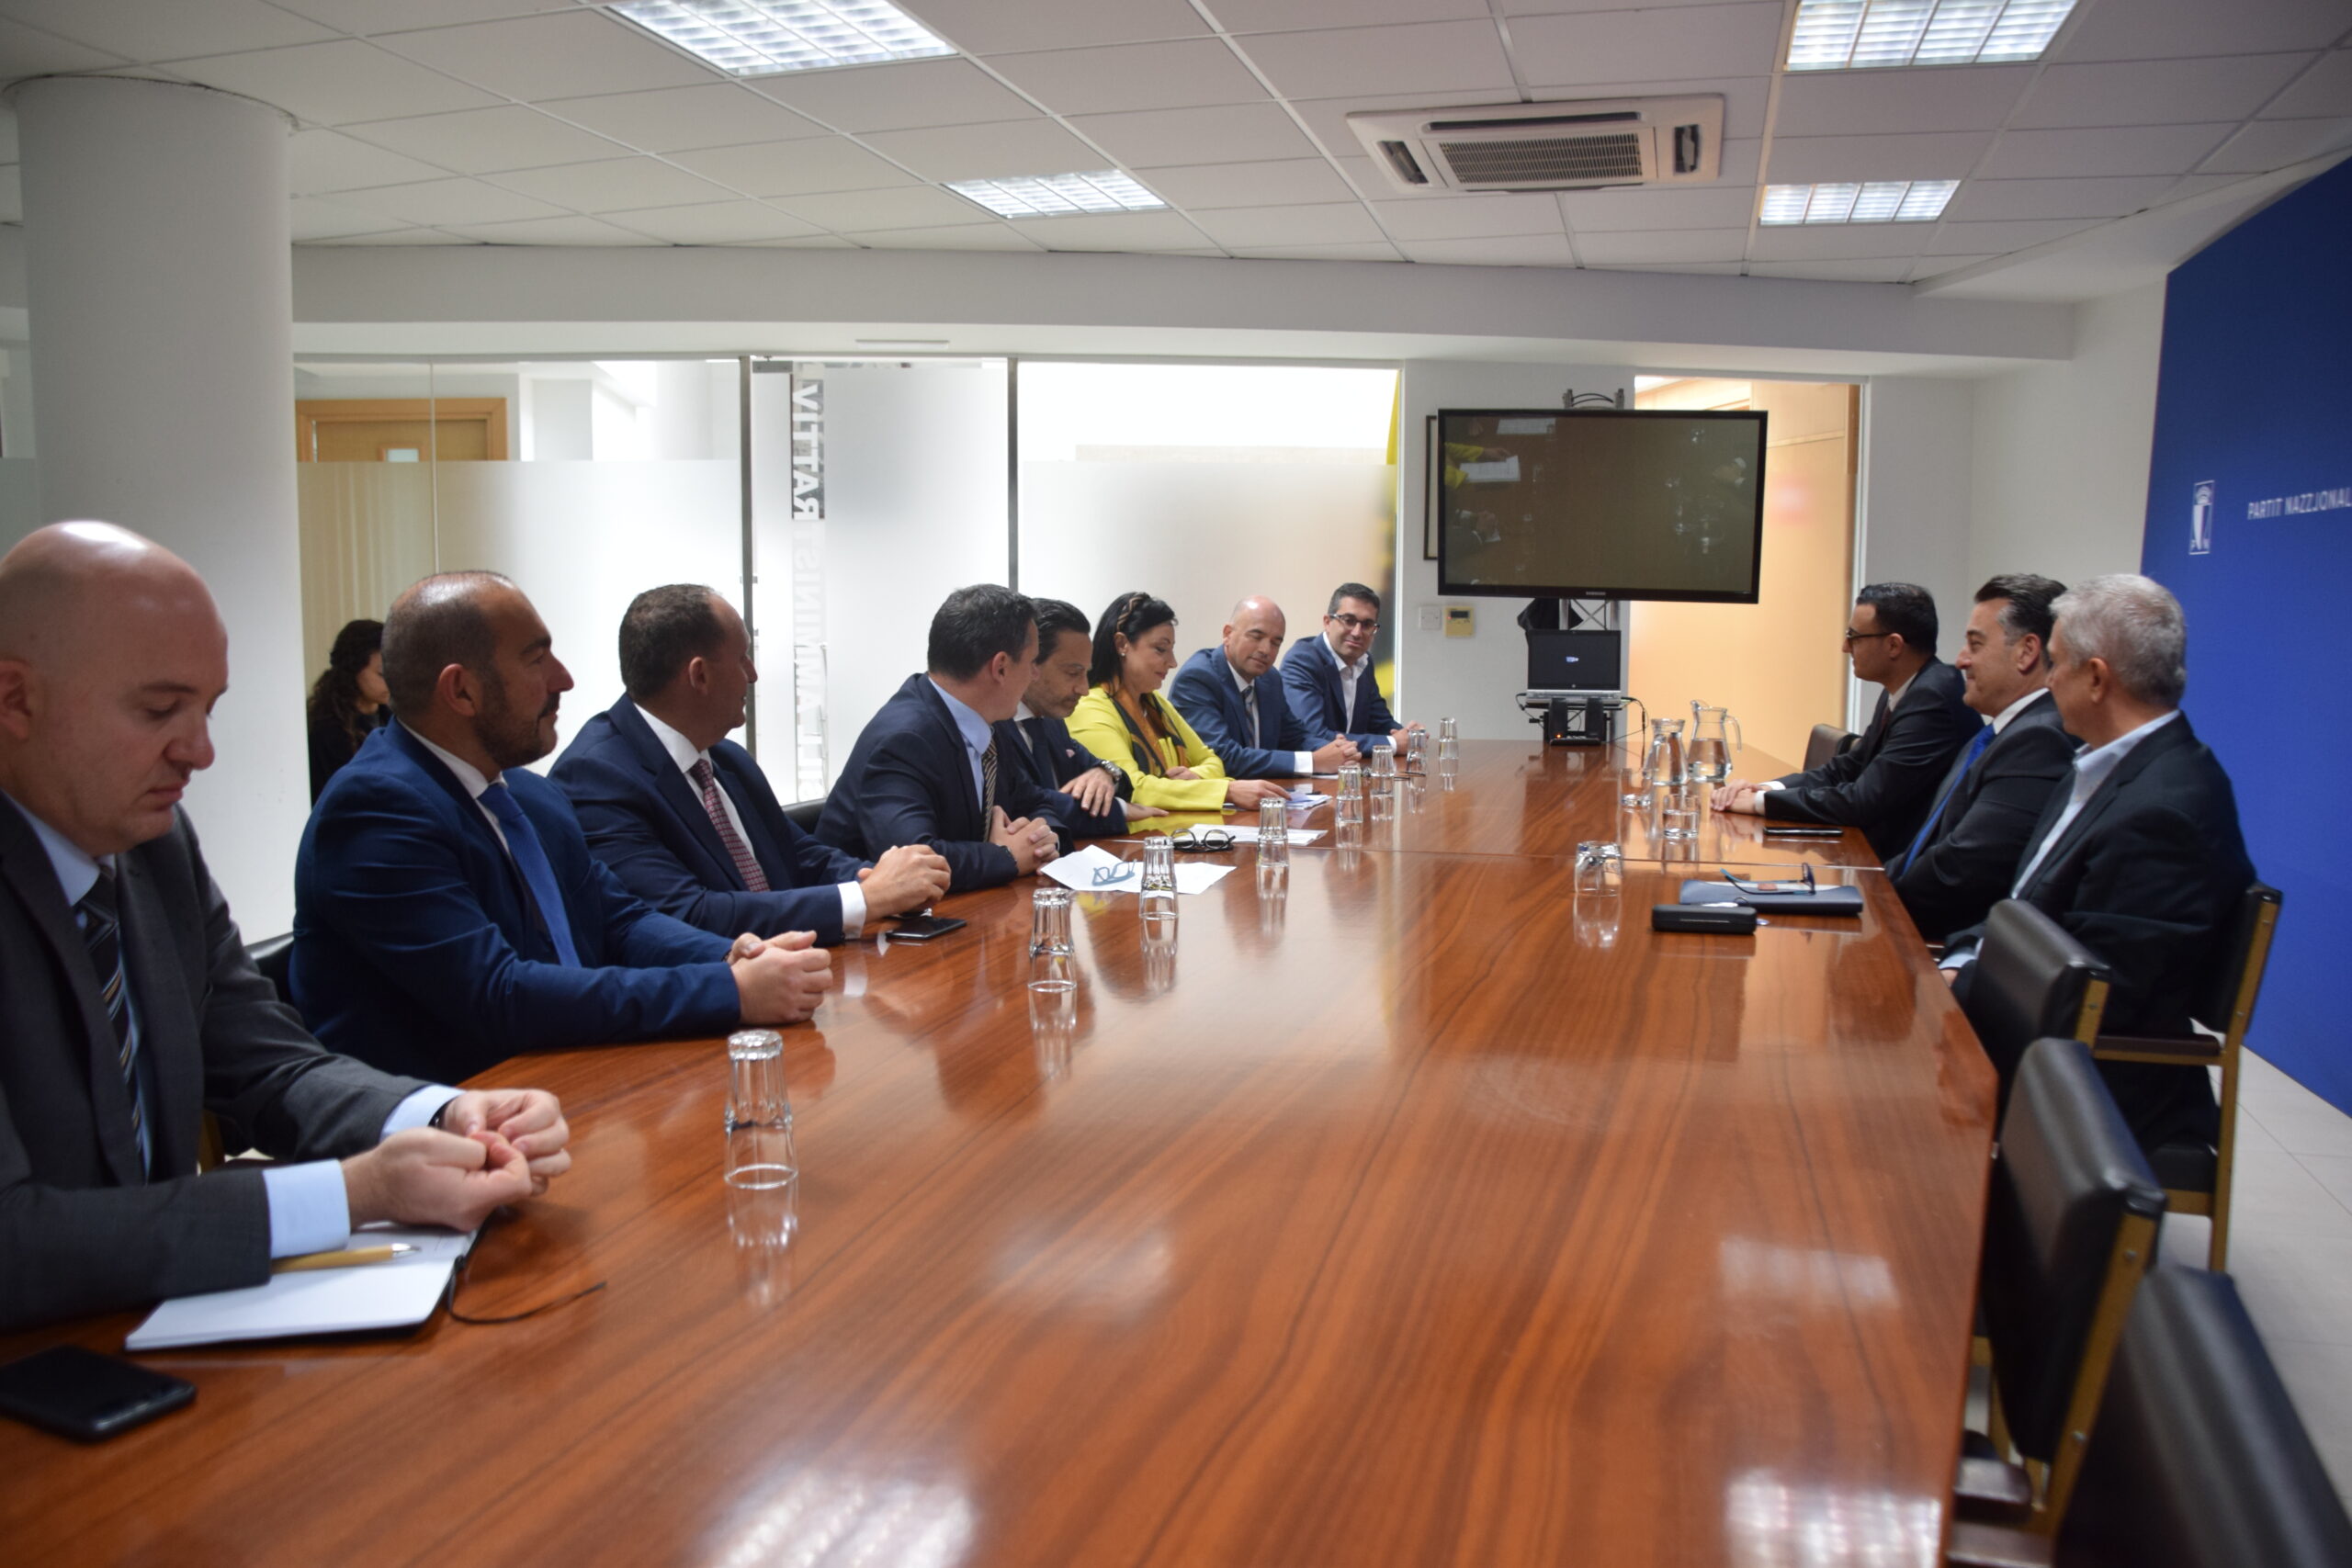 The Malta Chamber President together with BOM pays courtesy visit to Leader of the Opposition